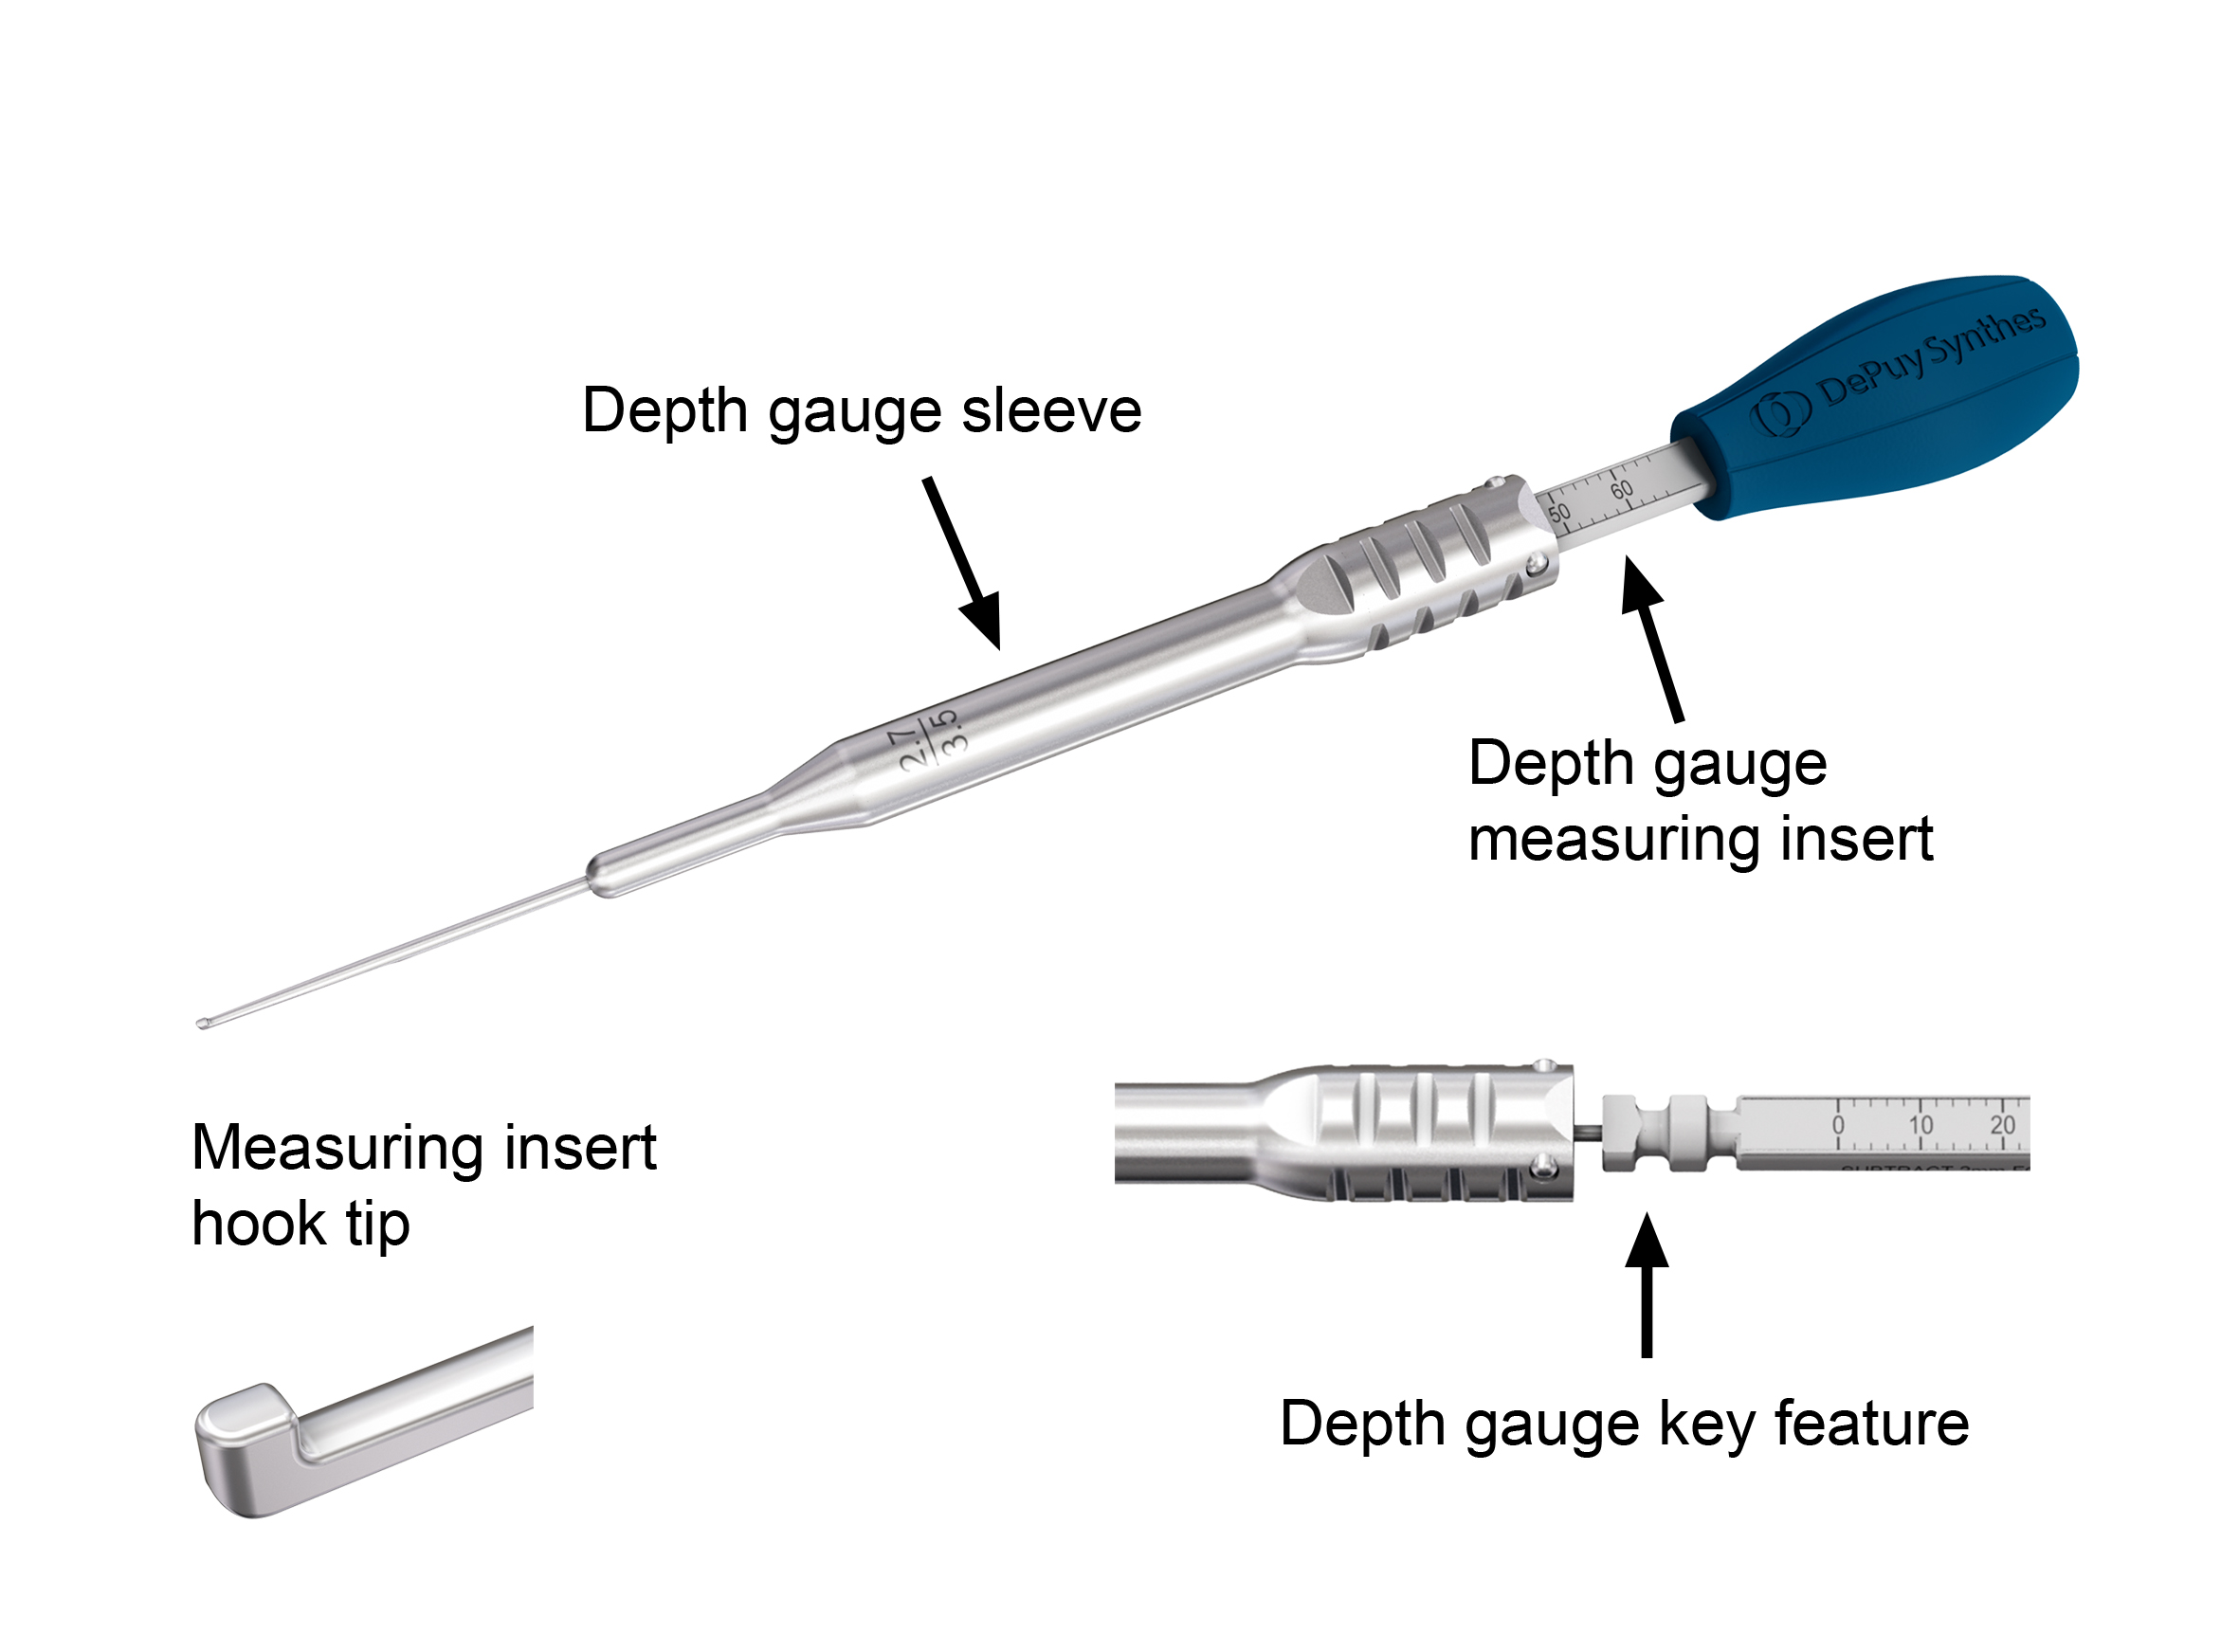 Small Bone Surgical Power Tools, DePuy Synthes